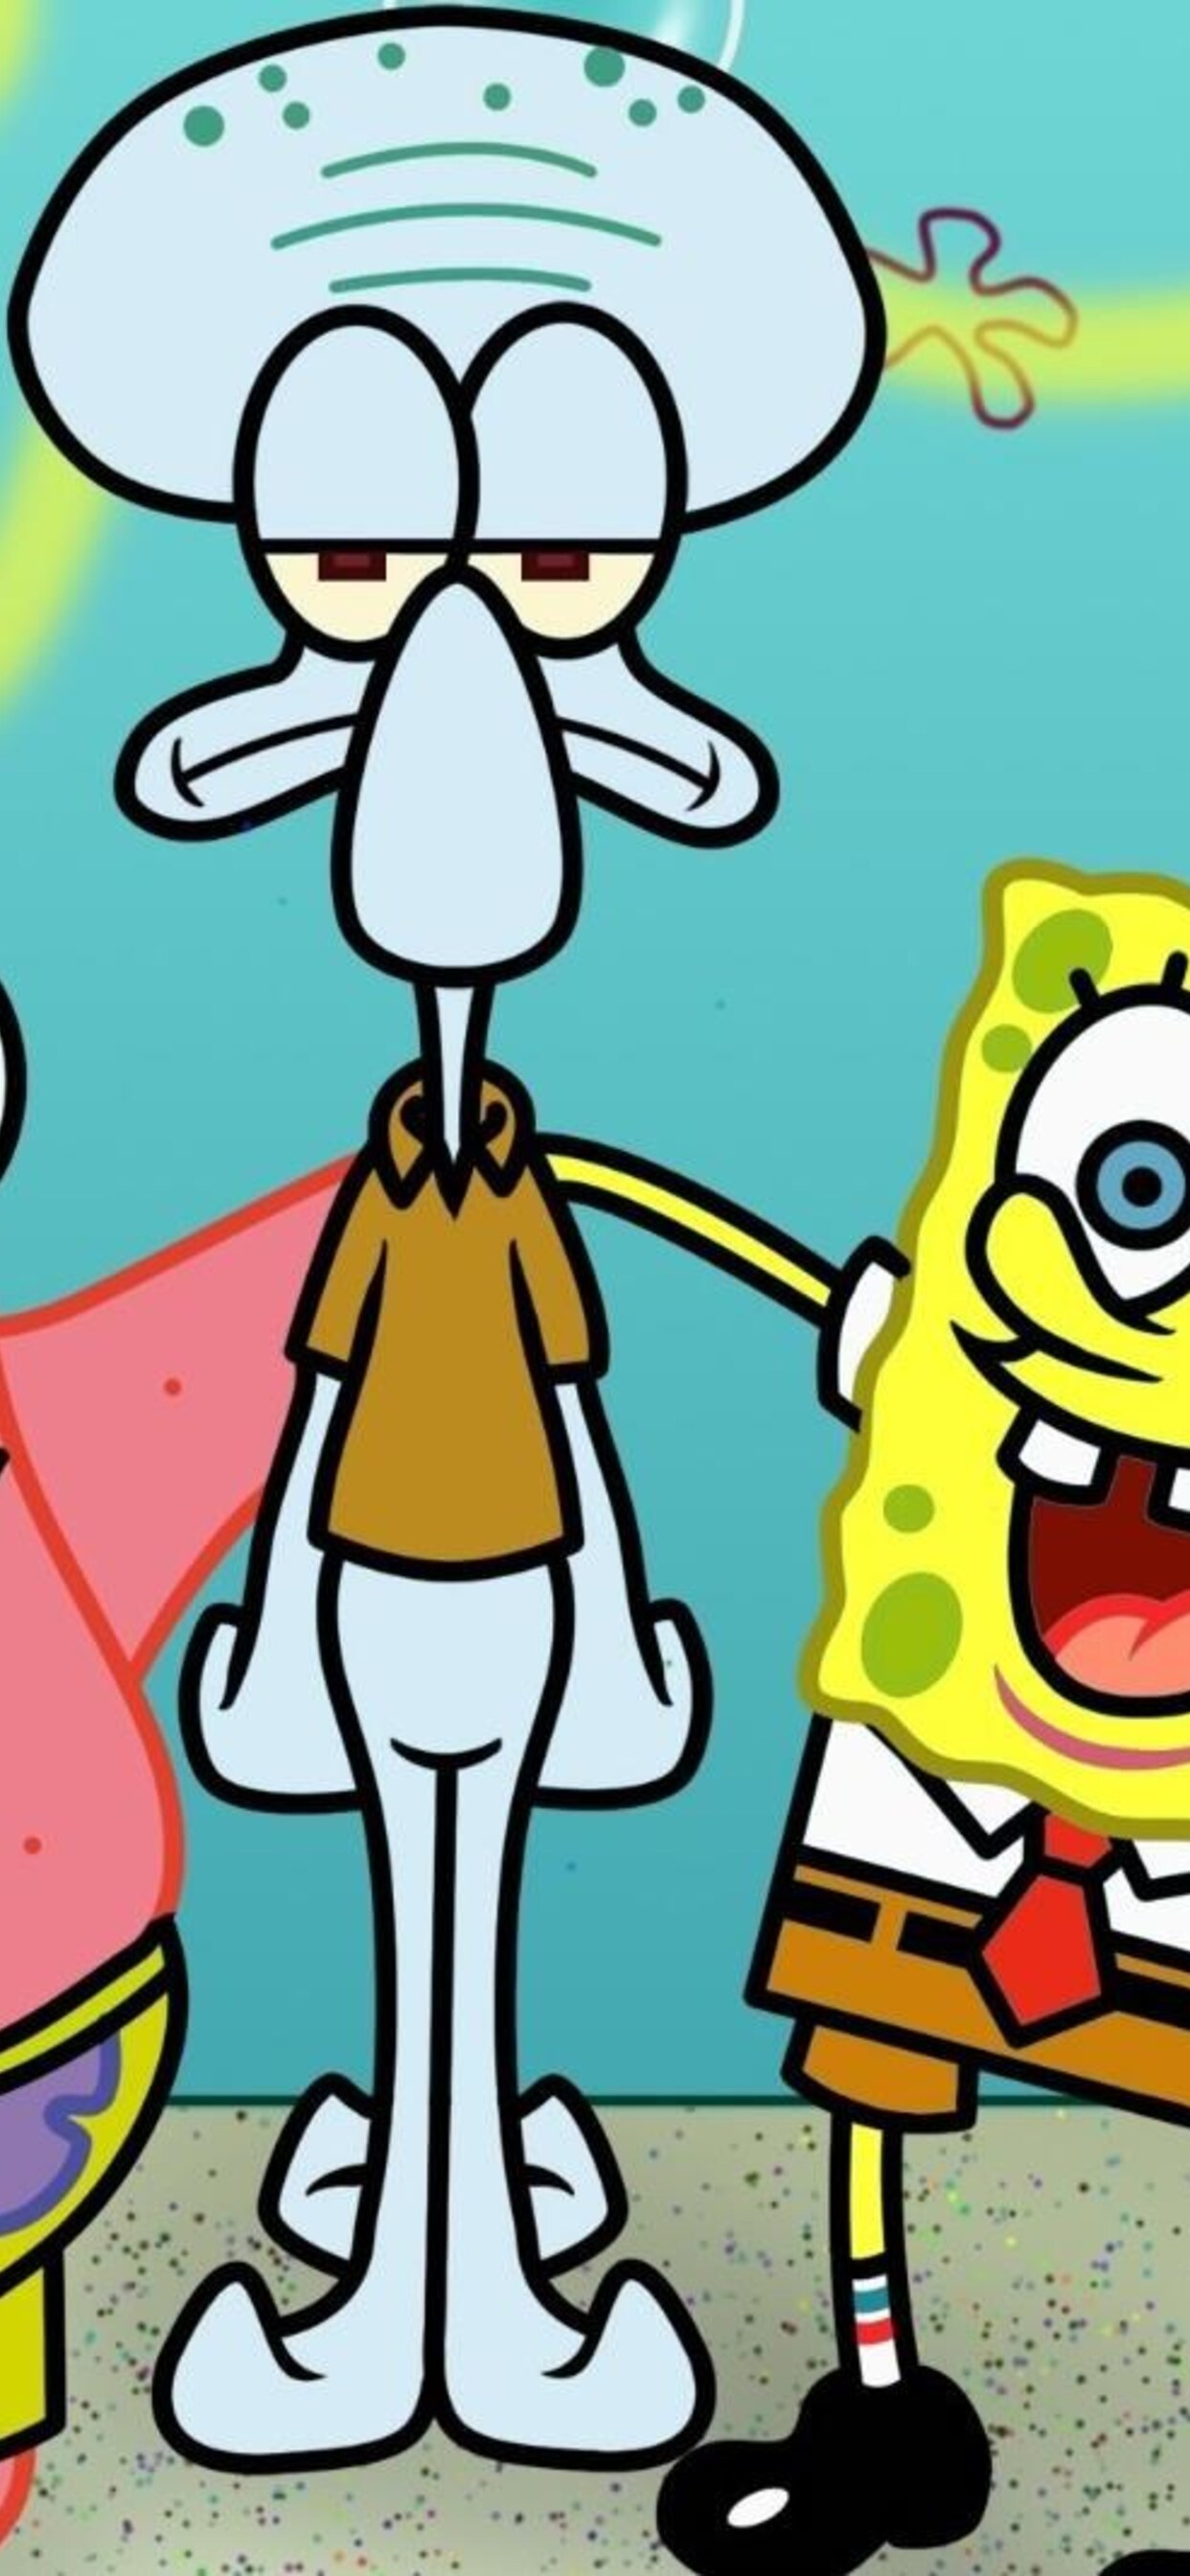 Spongebob and Squidward are the best characters in the show - SpongeBob